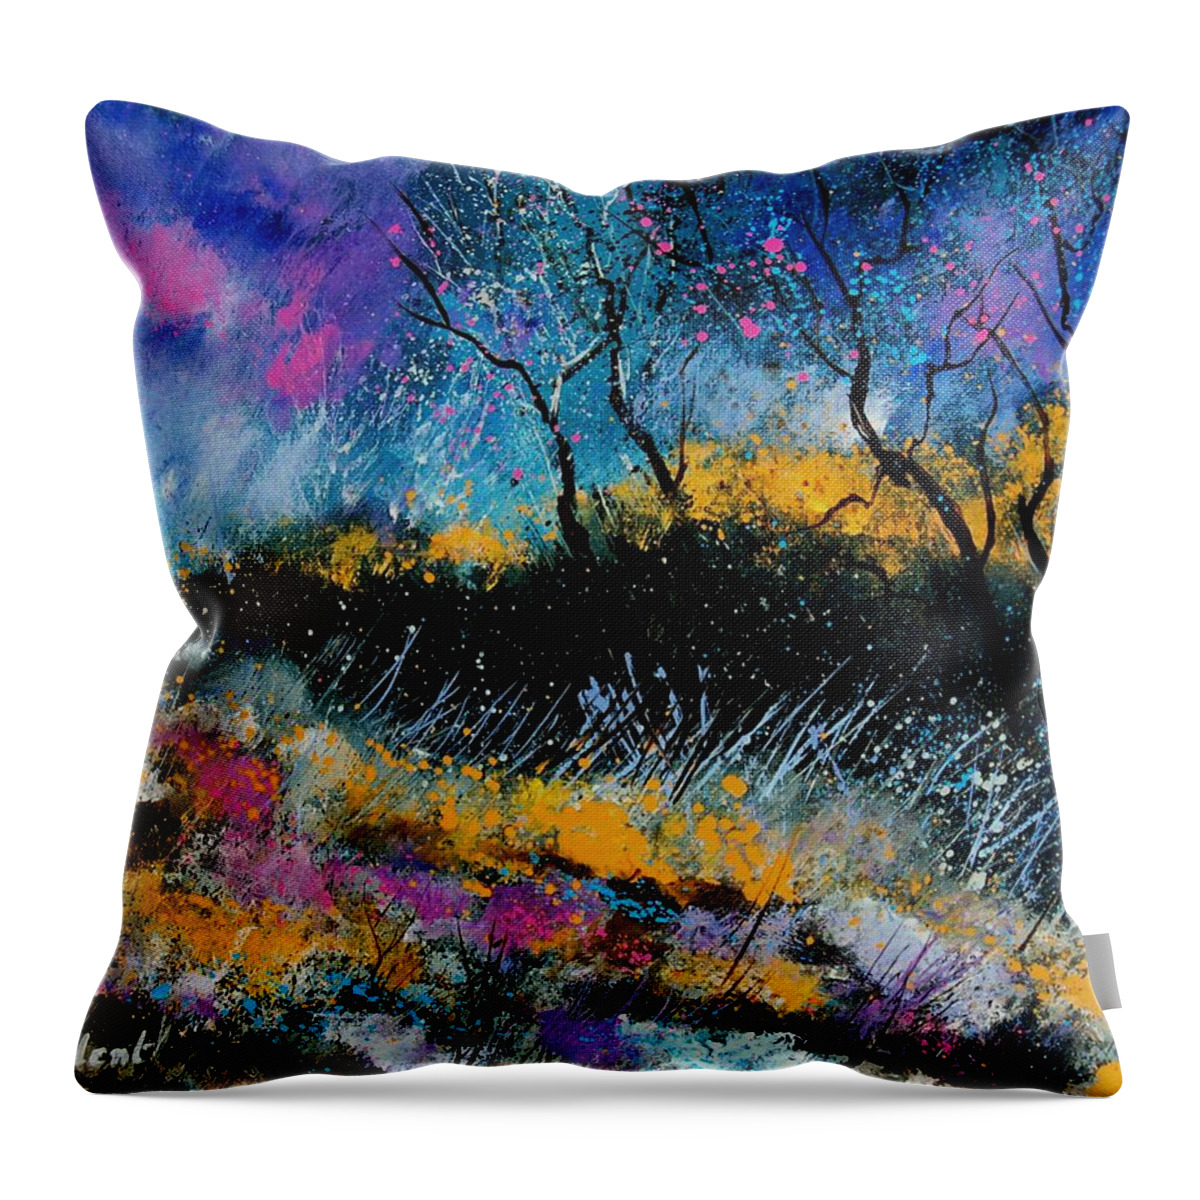 Landscape Throw Pillow featuring the painting Magic Morning Light by Pol Ledent